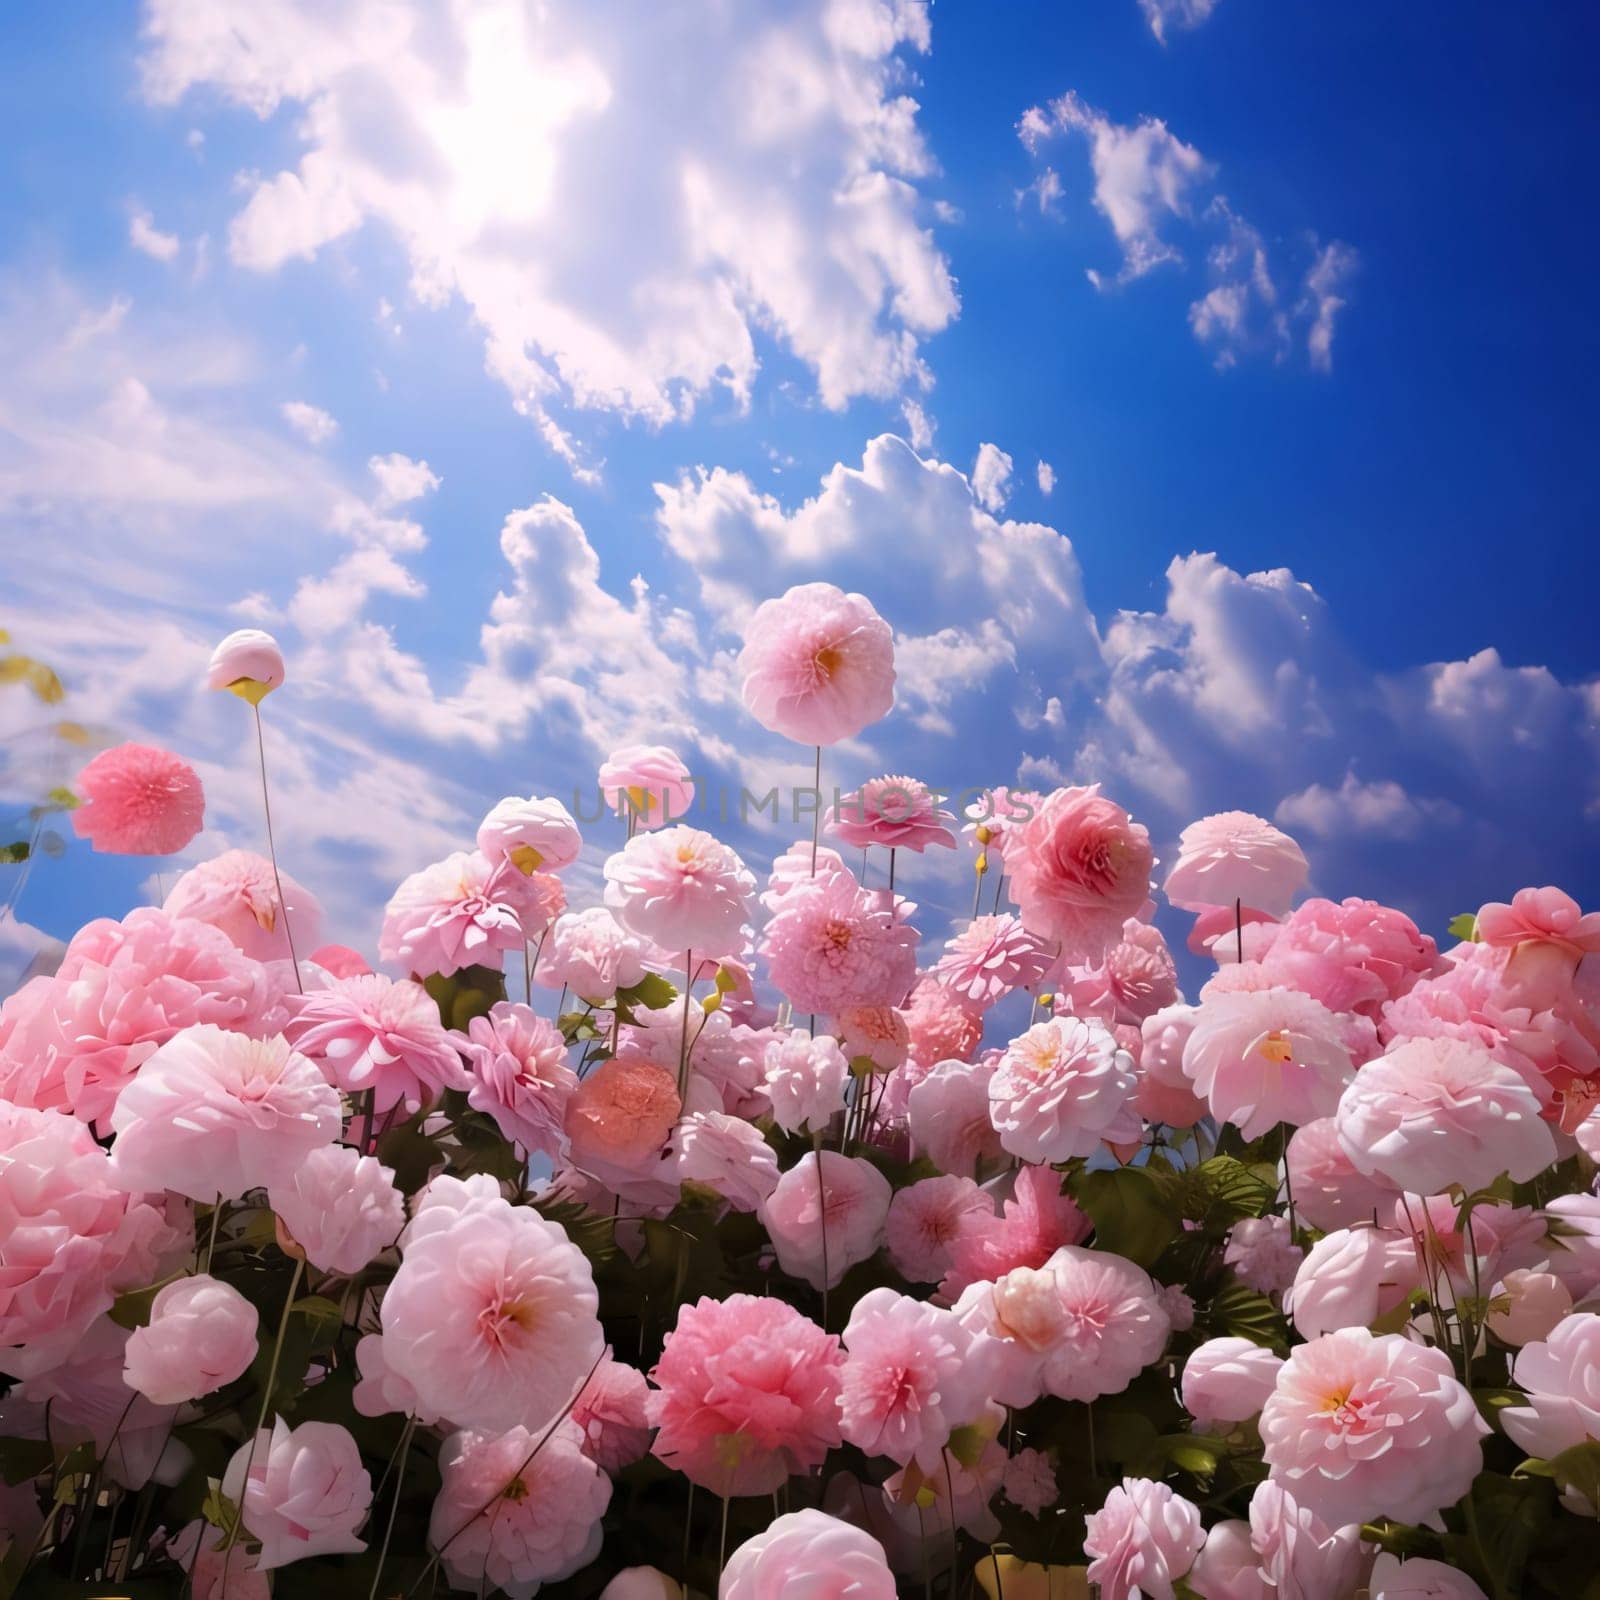 Pink flowers growing in the field. In the back the sky, clouds. Flowering flowers, a symbol of spring, new life. A joyful time of nature waking up to life.